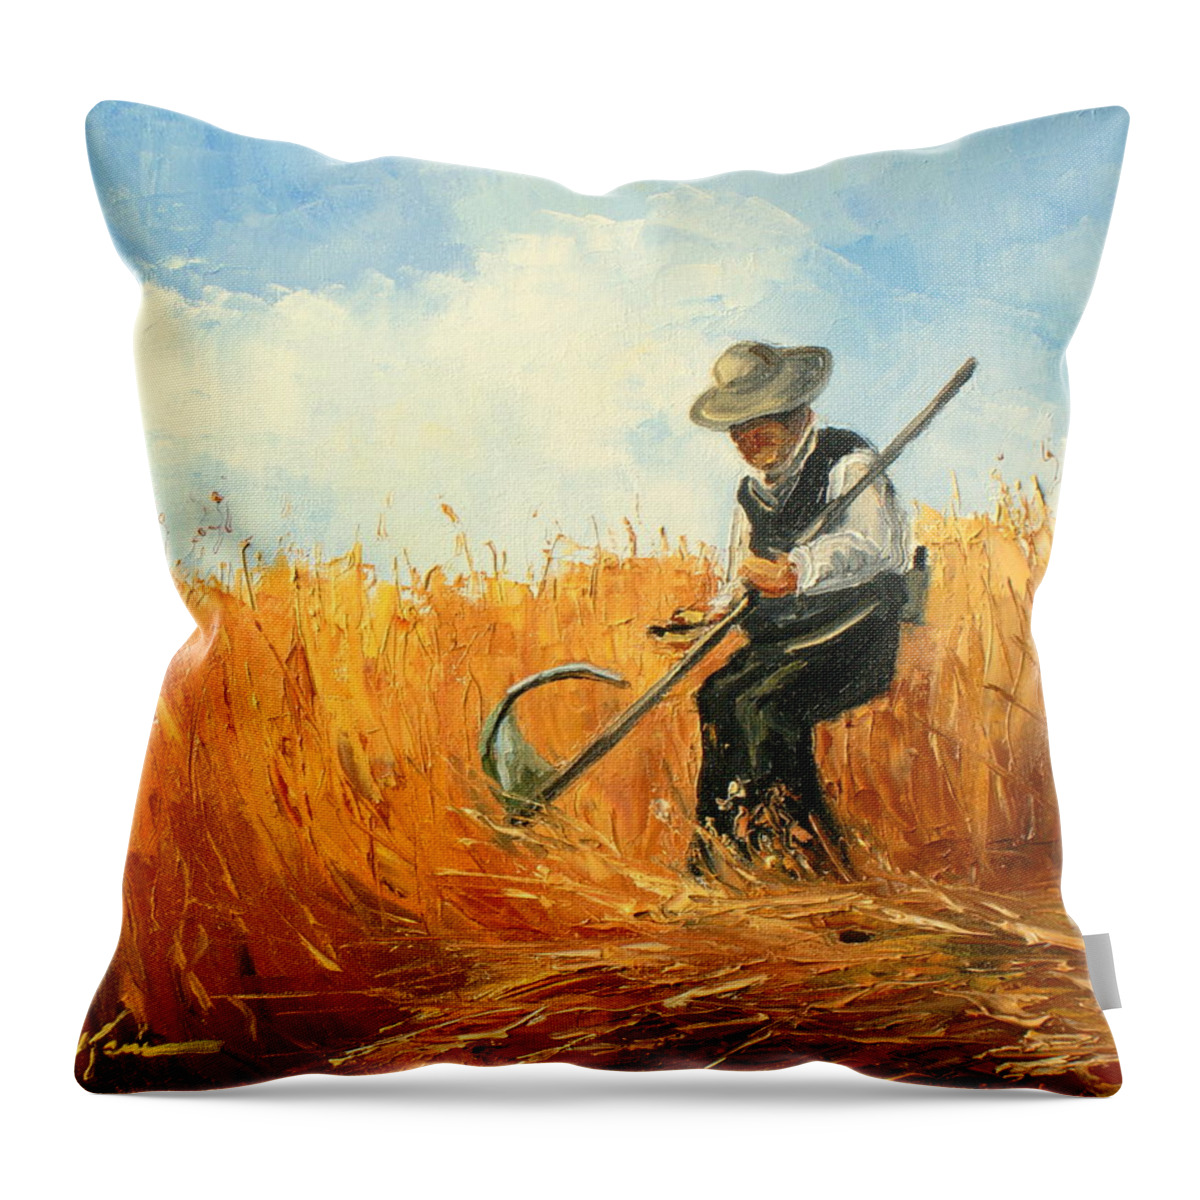 Harvest Throw Pillow featuring the painting The Harvester by Luke Karcz